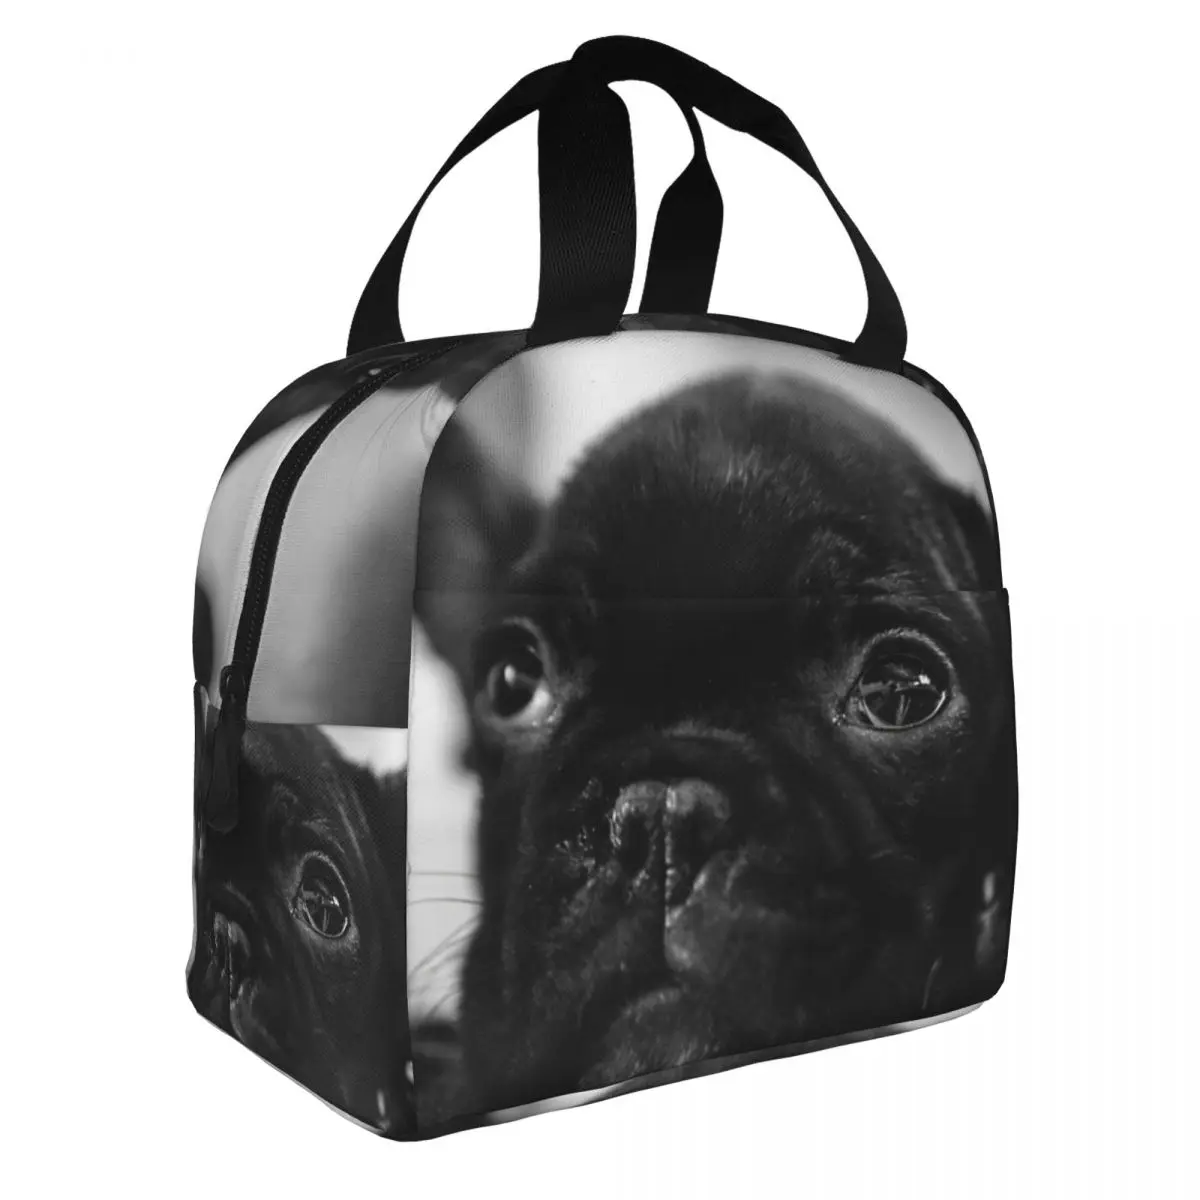 A French Bulldog Puppy Lunch Bento Bags Portable Aluminum Foil thickened Thermal Cloth Lunch Bag for Women Men Boy